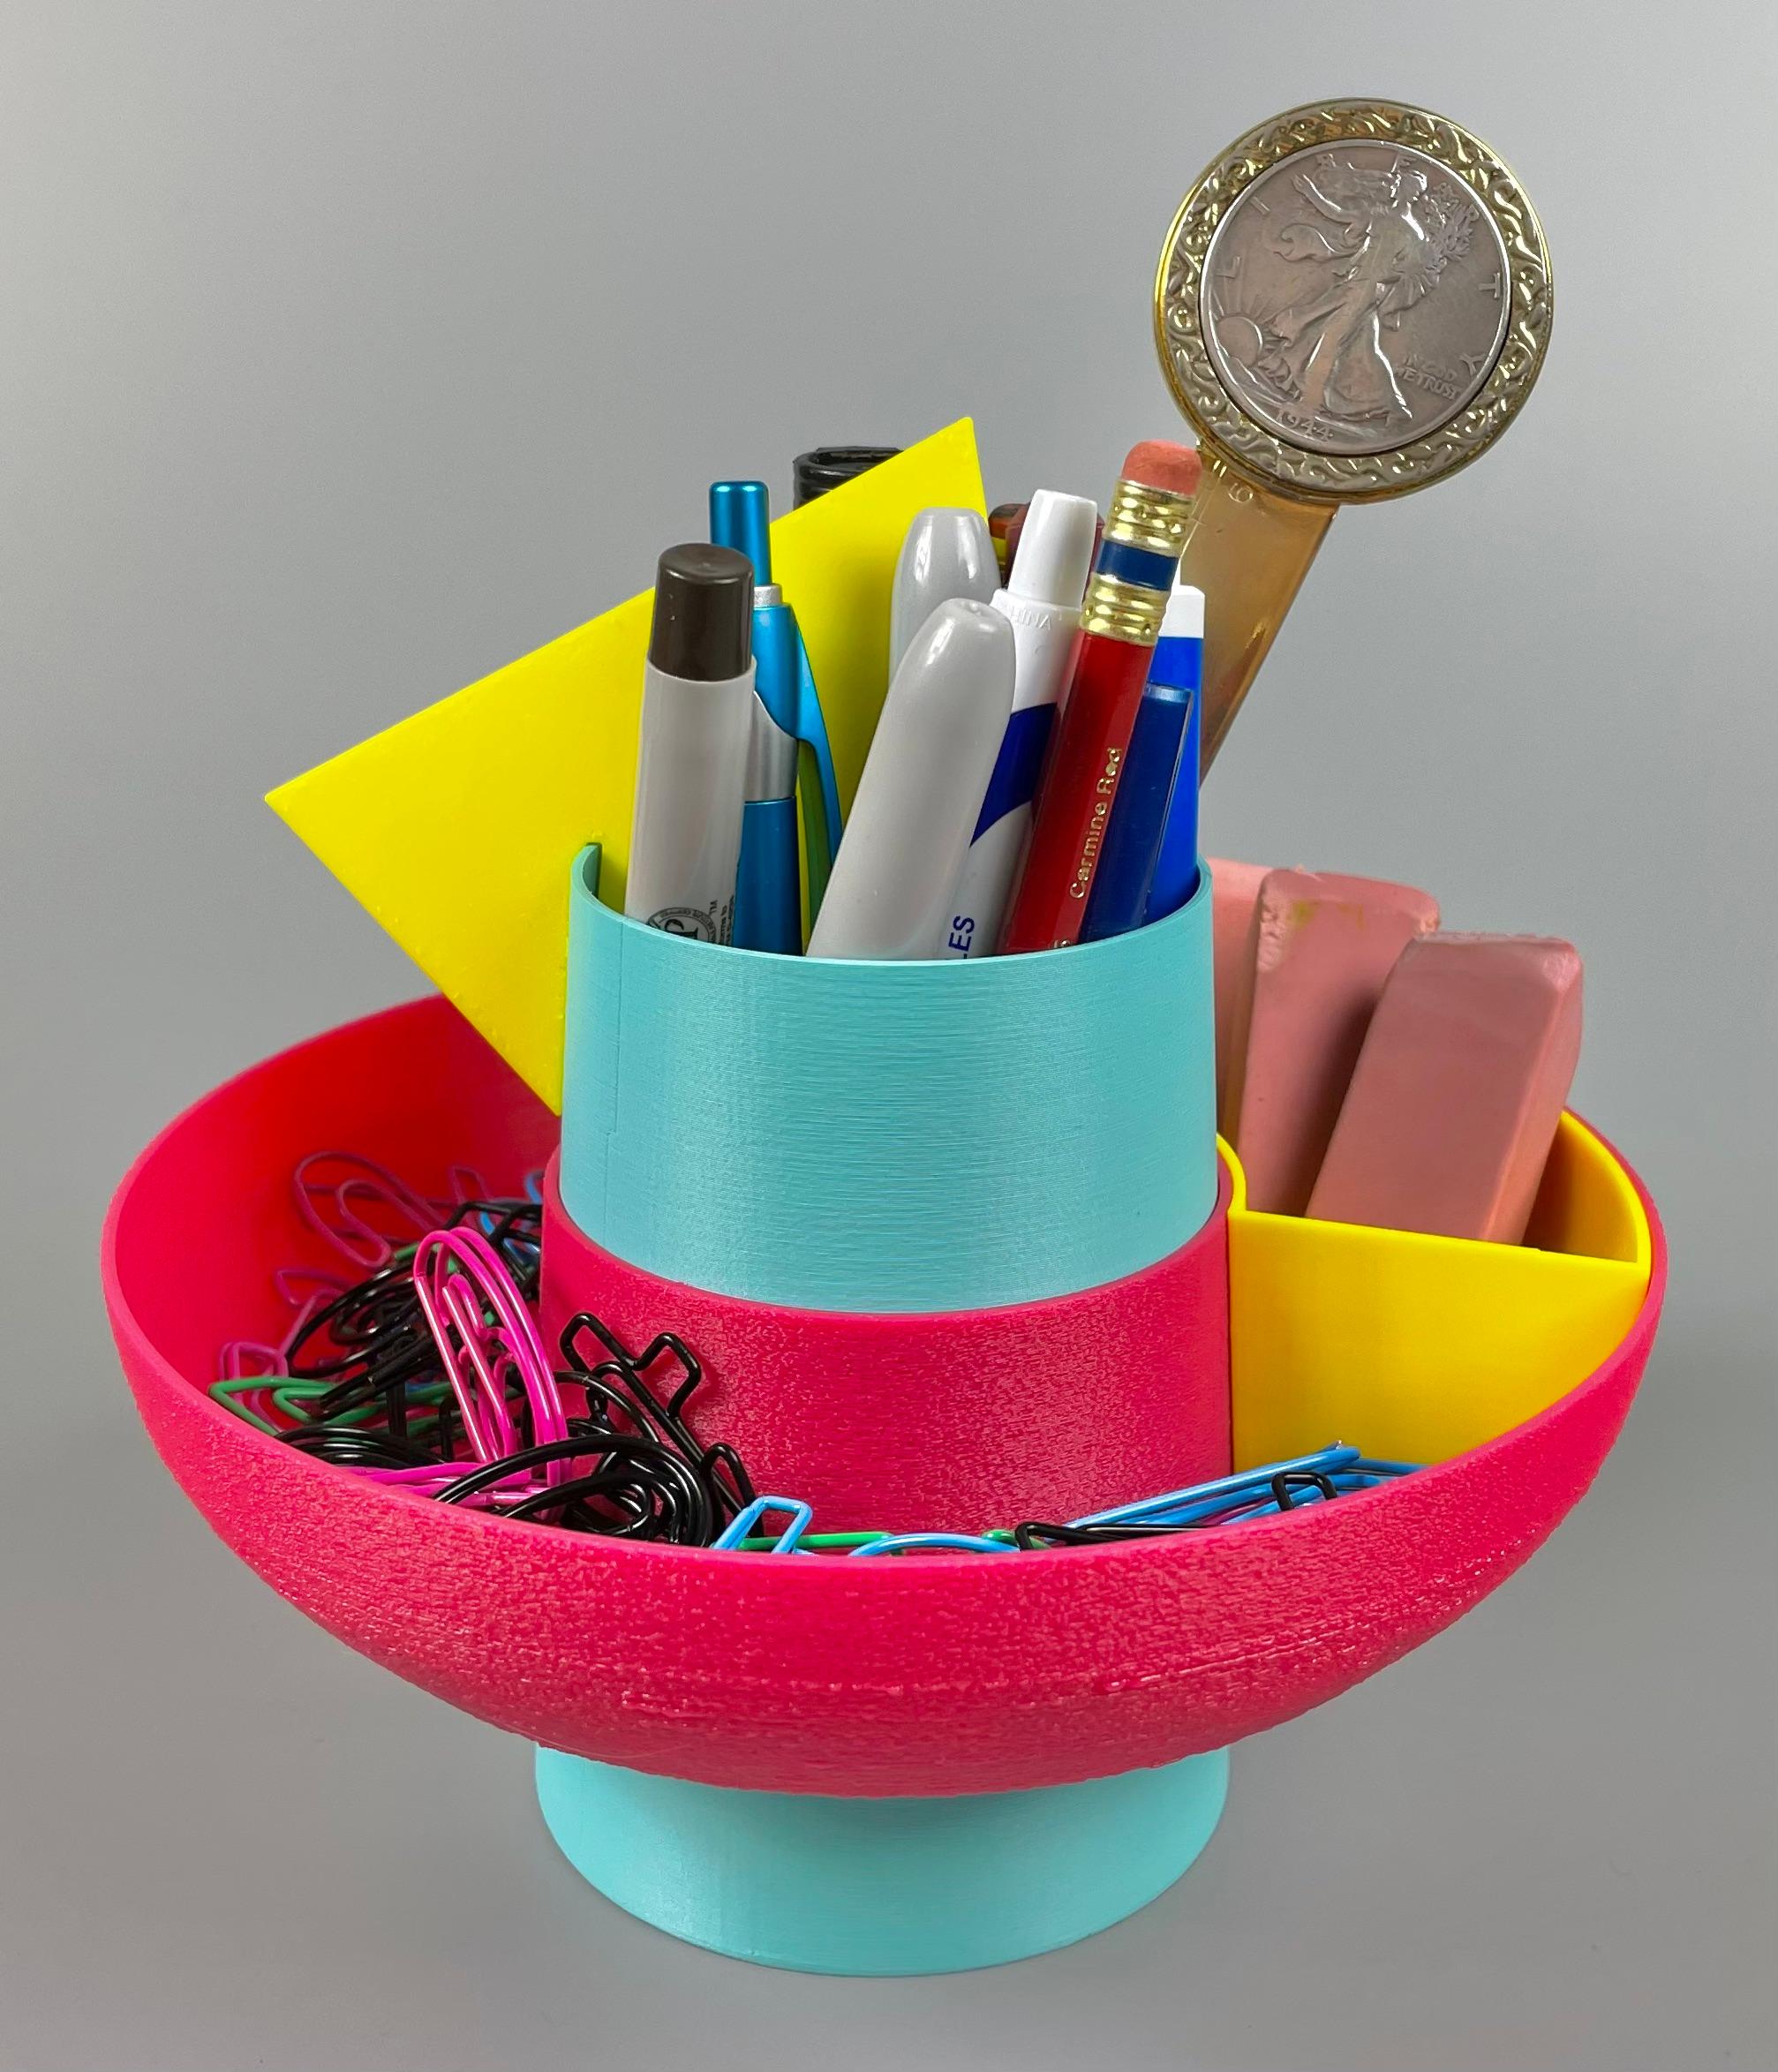 90's Inspired Desk Organizer - With stuff in it. - 3d model